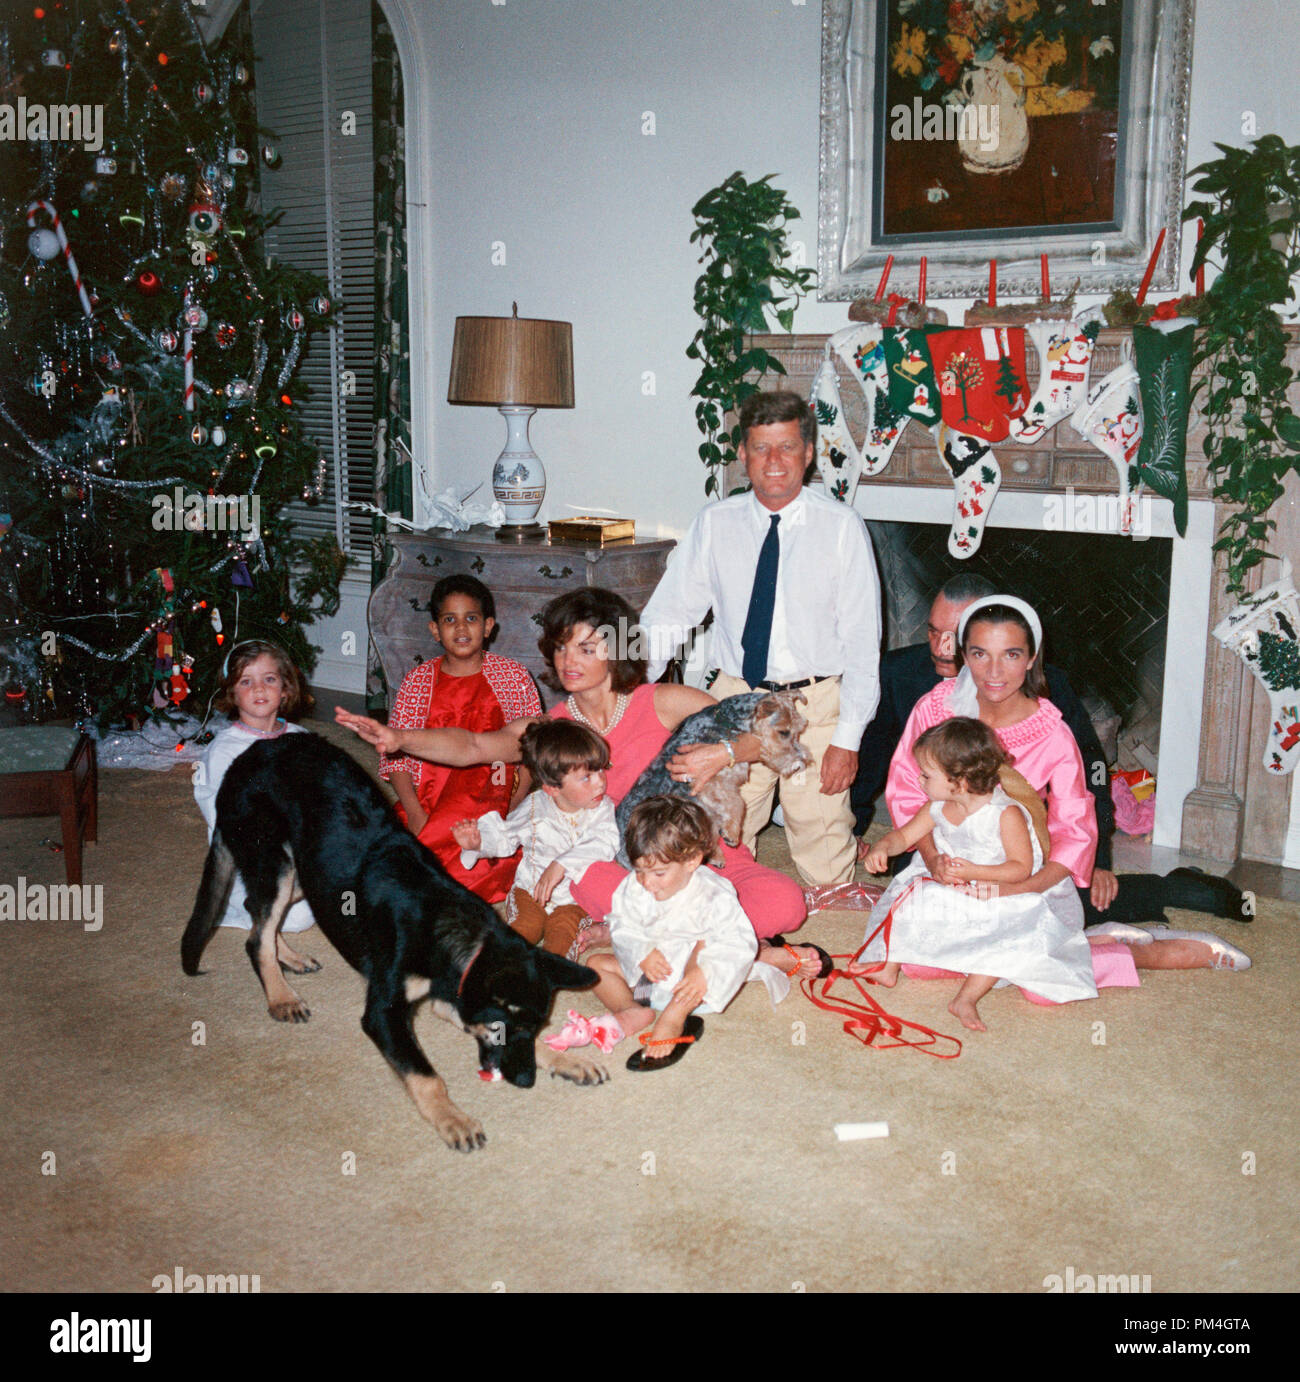 President John F. Kennedy and First Lady Jacqueline Kennedy with their family on Christmas Day at the White House, Washington, D.C., December 25, 1962. (L-R): Caroline Kennedy, unknown, John F. Kennedy Jr., Anthony Radziwill, Prince Stanislaus Radziwill, Lee Radziwill, and their daughter, Ann Christine Radziwill. (Photo courtesy of JFK Library)  File Reference # 1003 108THA Stock Photo